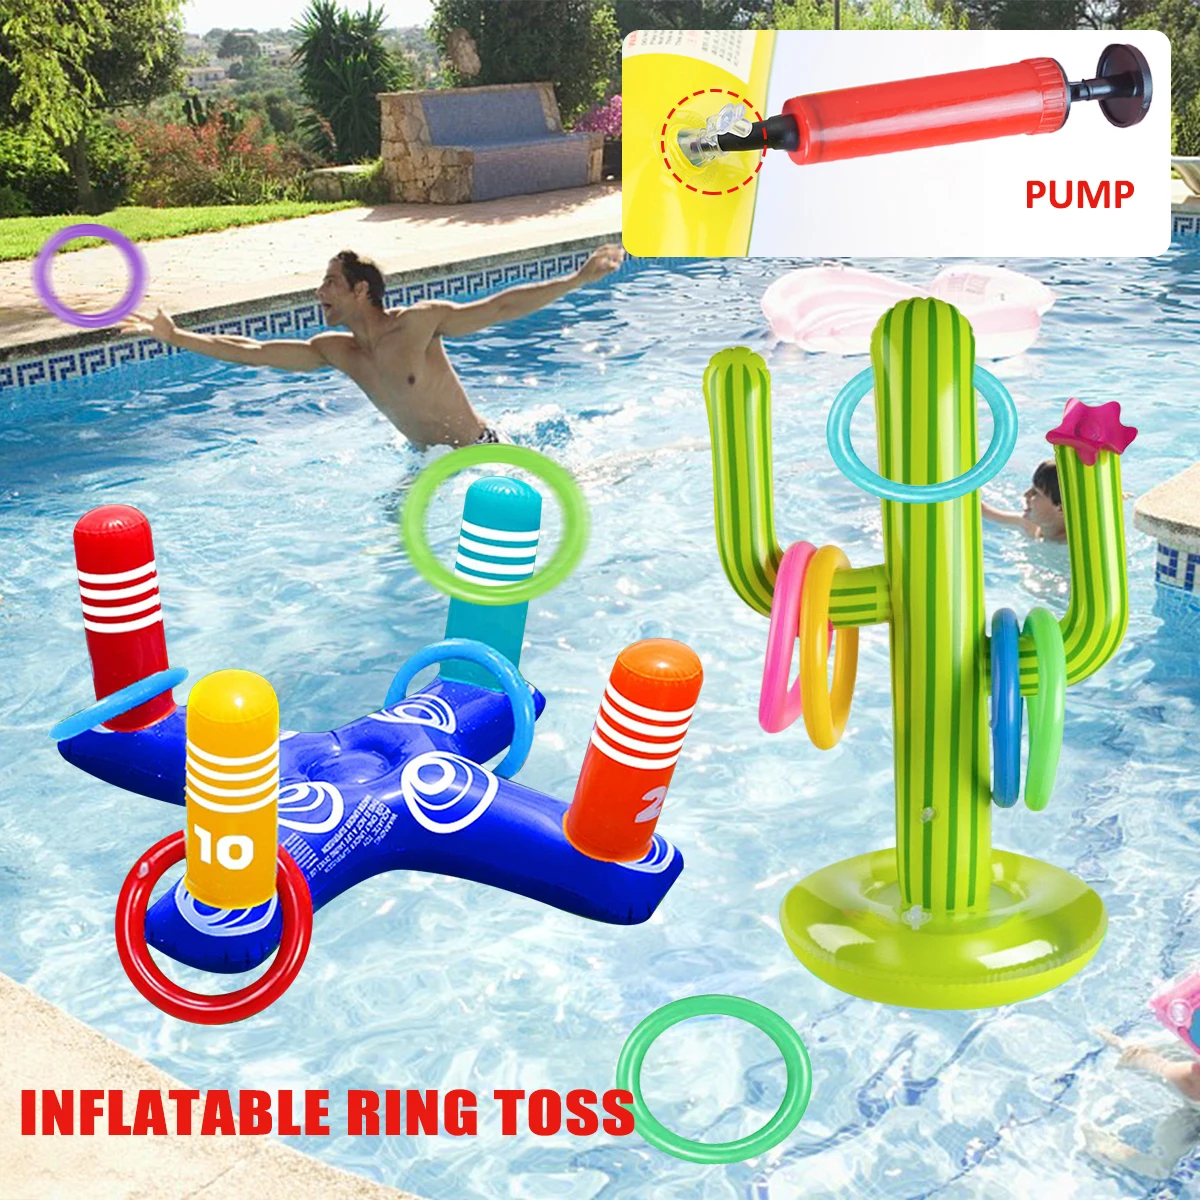 Inflatable Cactus Ring Throwing Pool Toy Game Set Summer Outdoor Pool Beach - £11.12 GBP